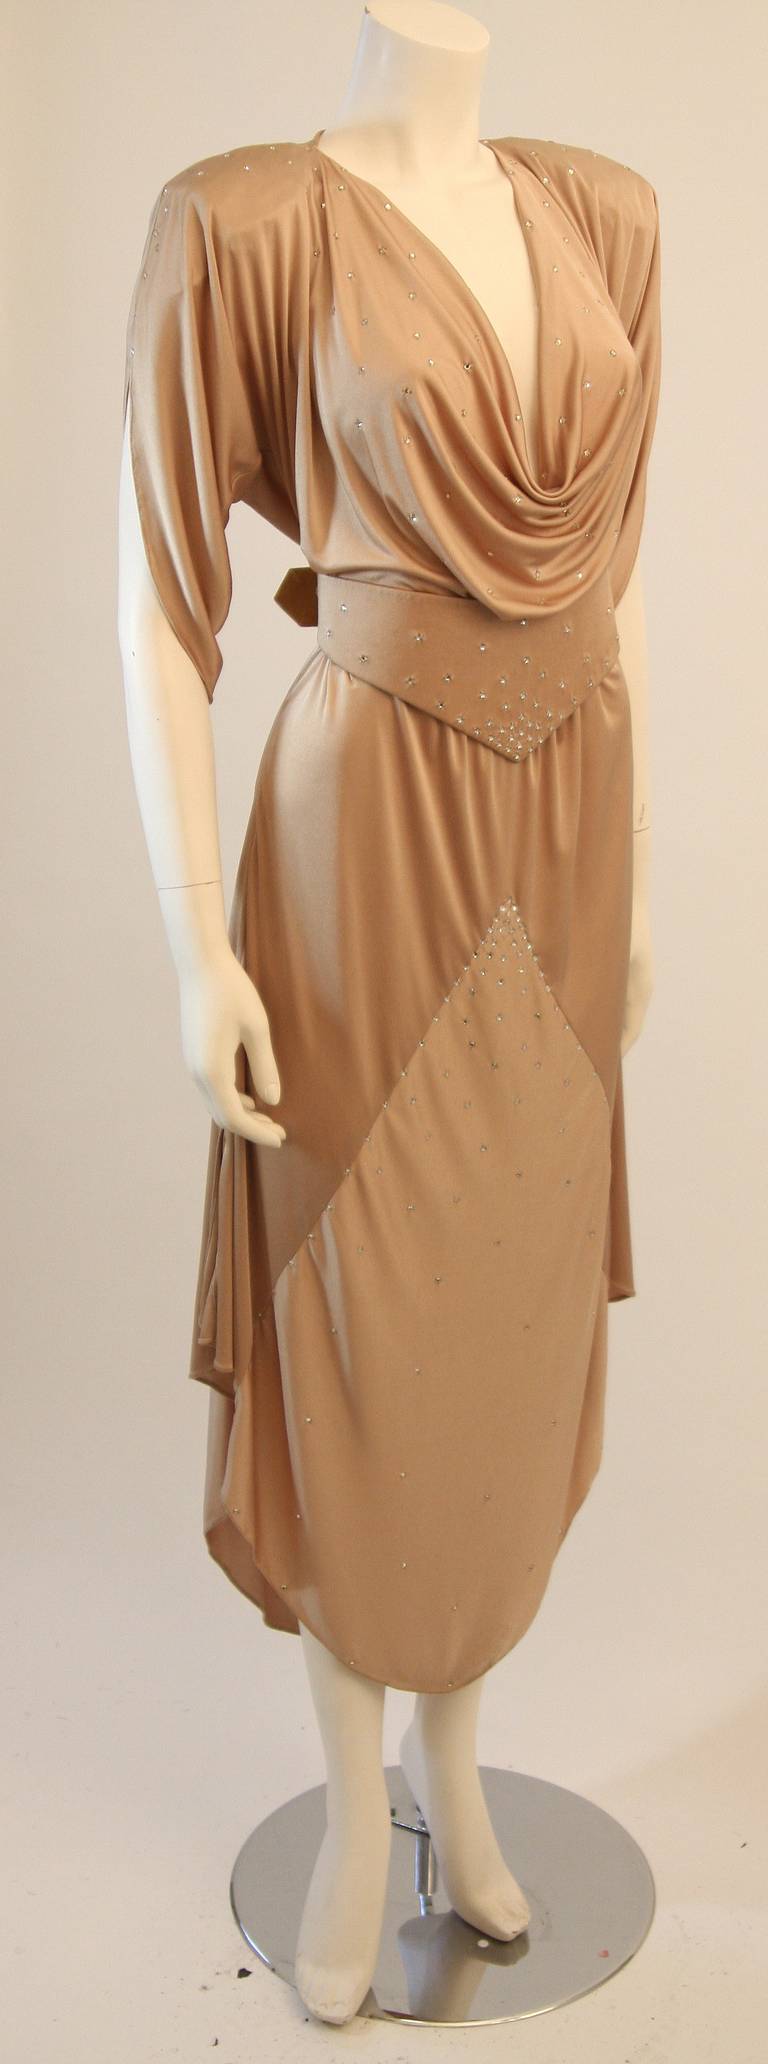 This is a gorgeous evening dress by Brigitta. The dress is composed of a great champagne jersey that is embellished with rhinestones. The dress features a beautifully draped sleeve and bust. Comes with belt.  

Measures (Approximately)
Length: